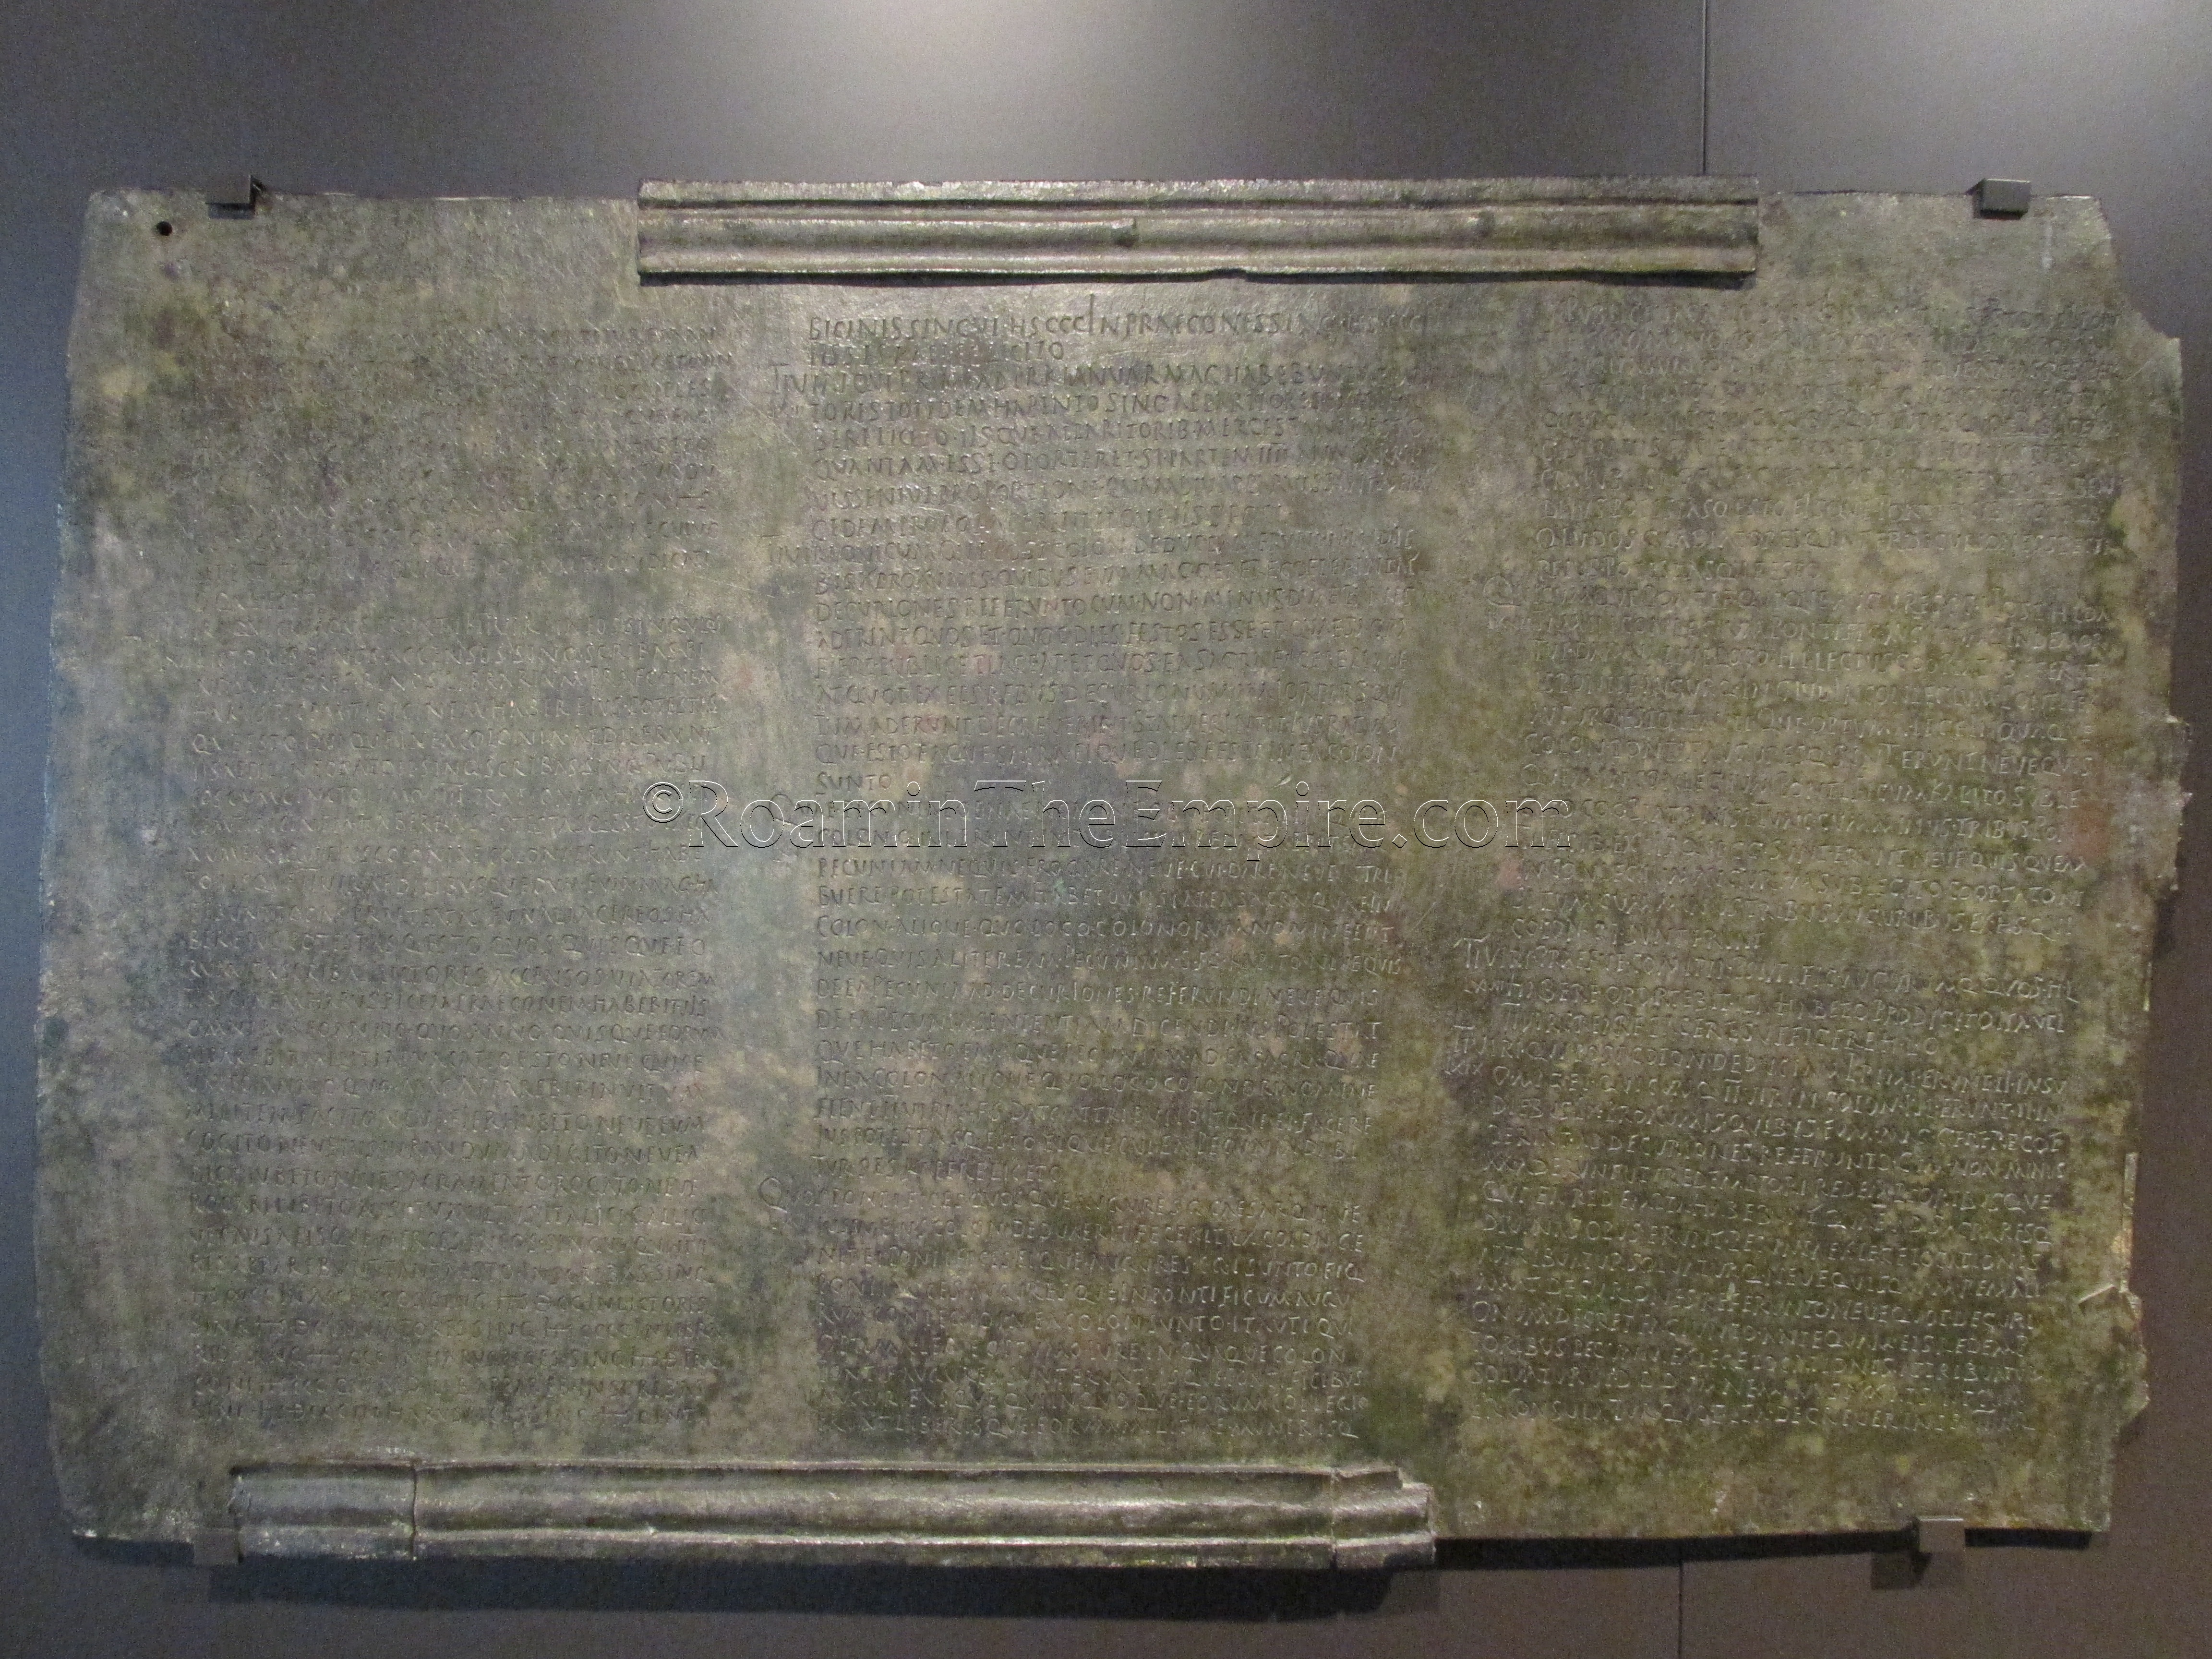 Tablet of the Lex Ursonensis containing chapters 61 to 69. Madrid.